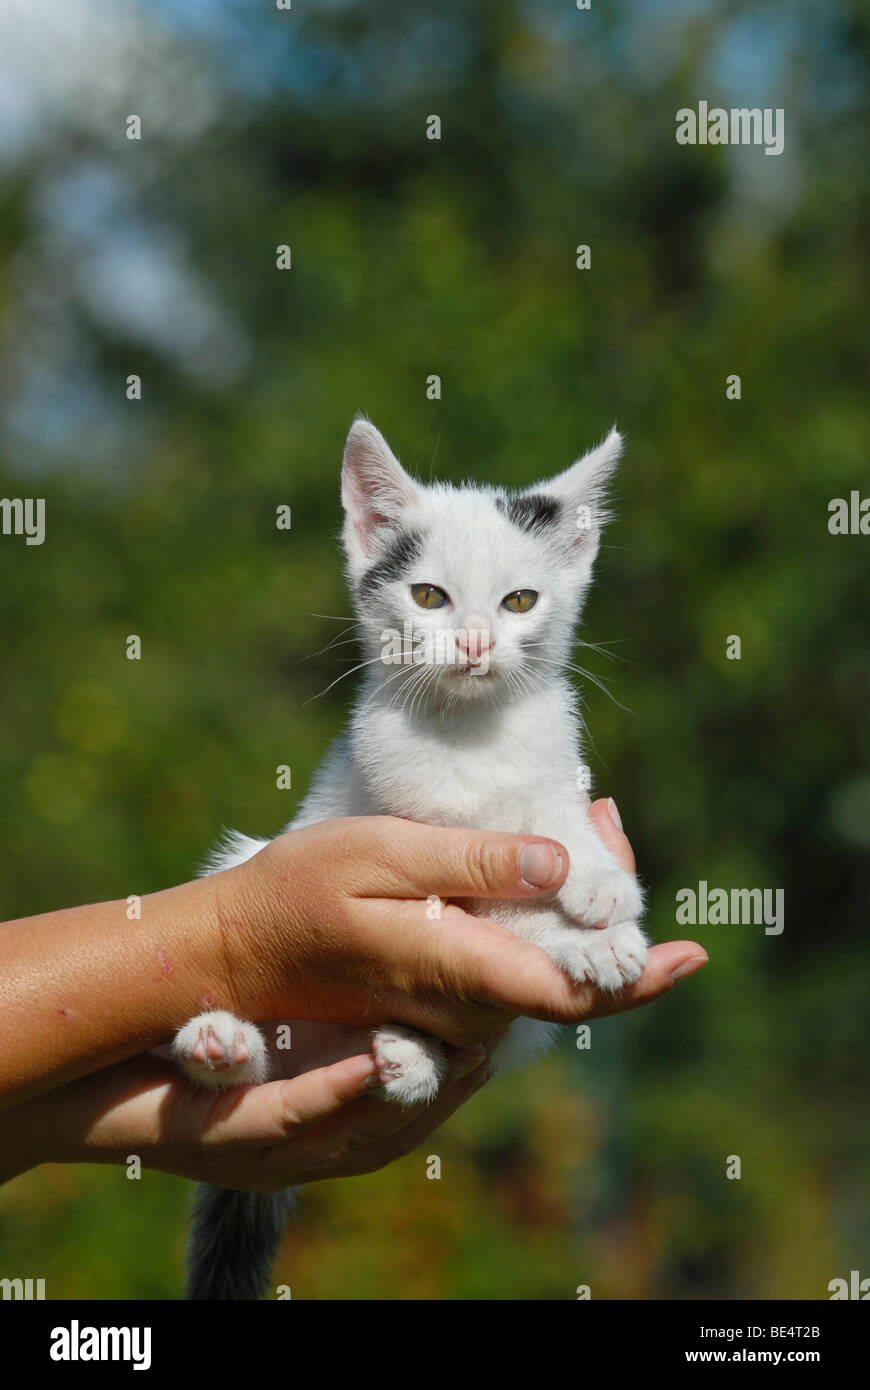 Domestic cat, kitten being held by hands Stock Photo